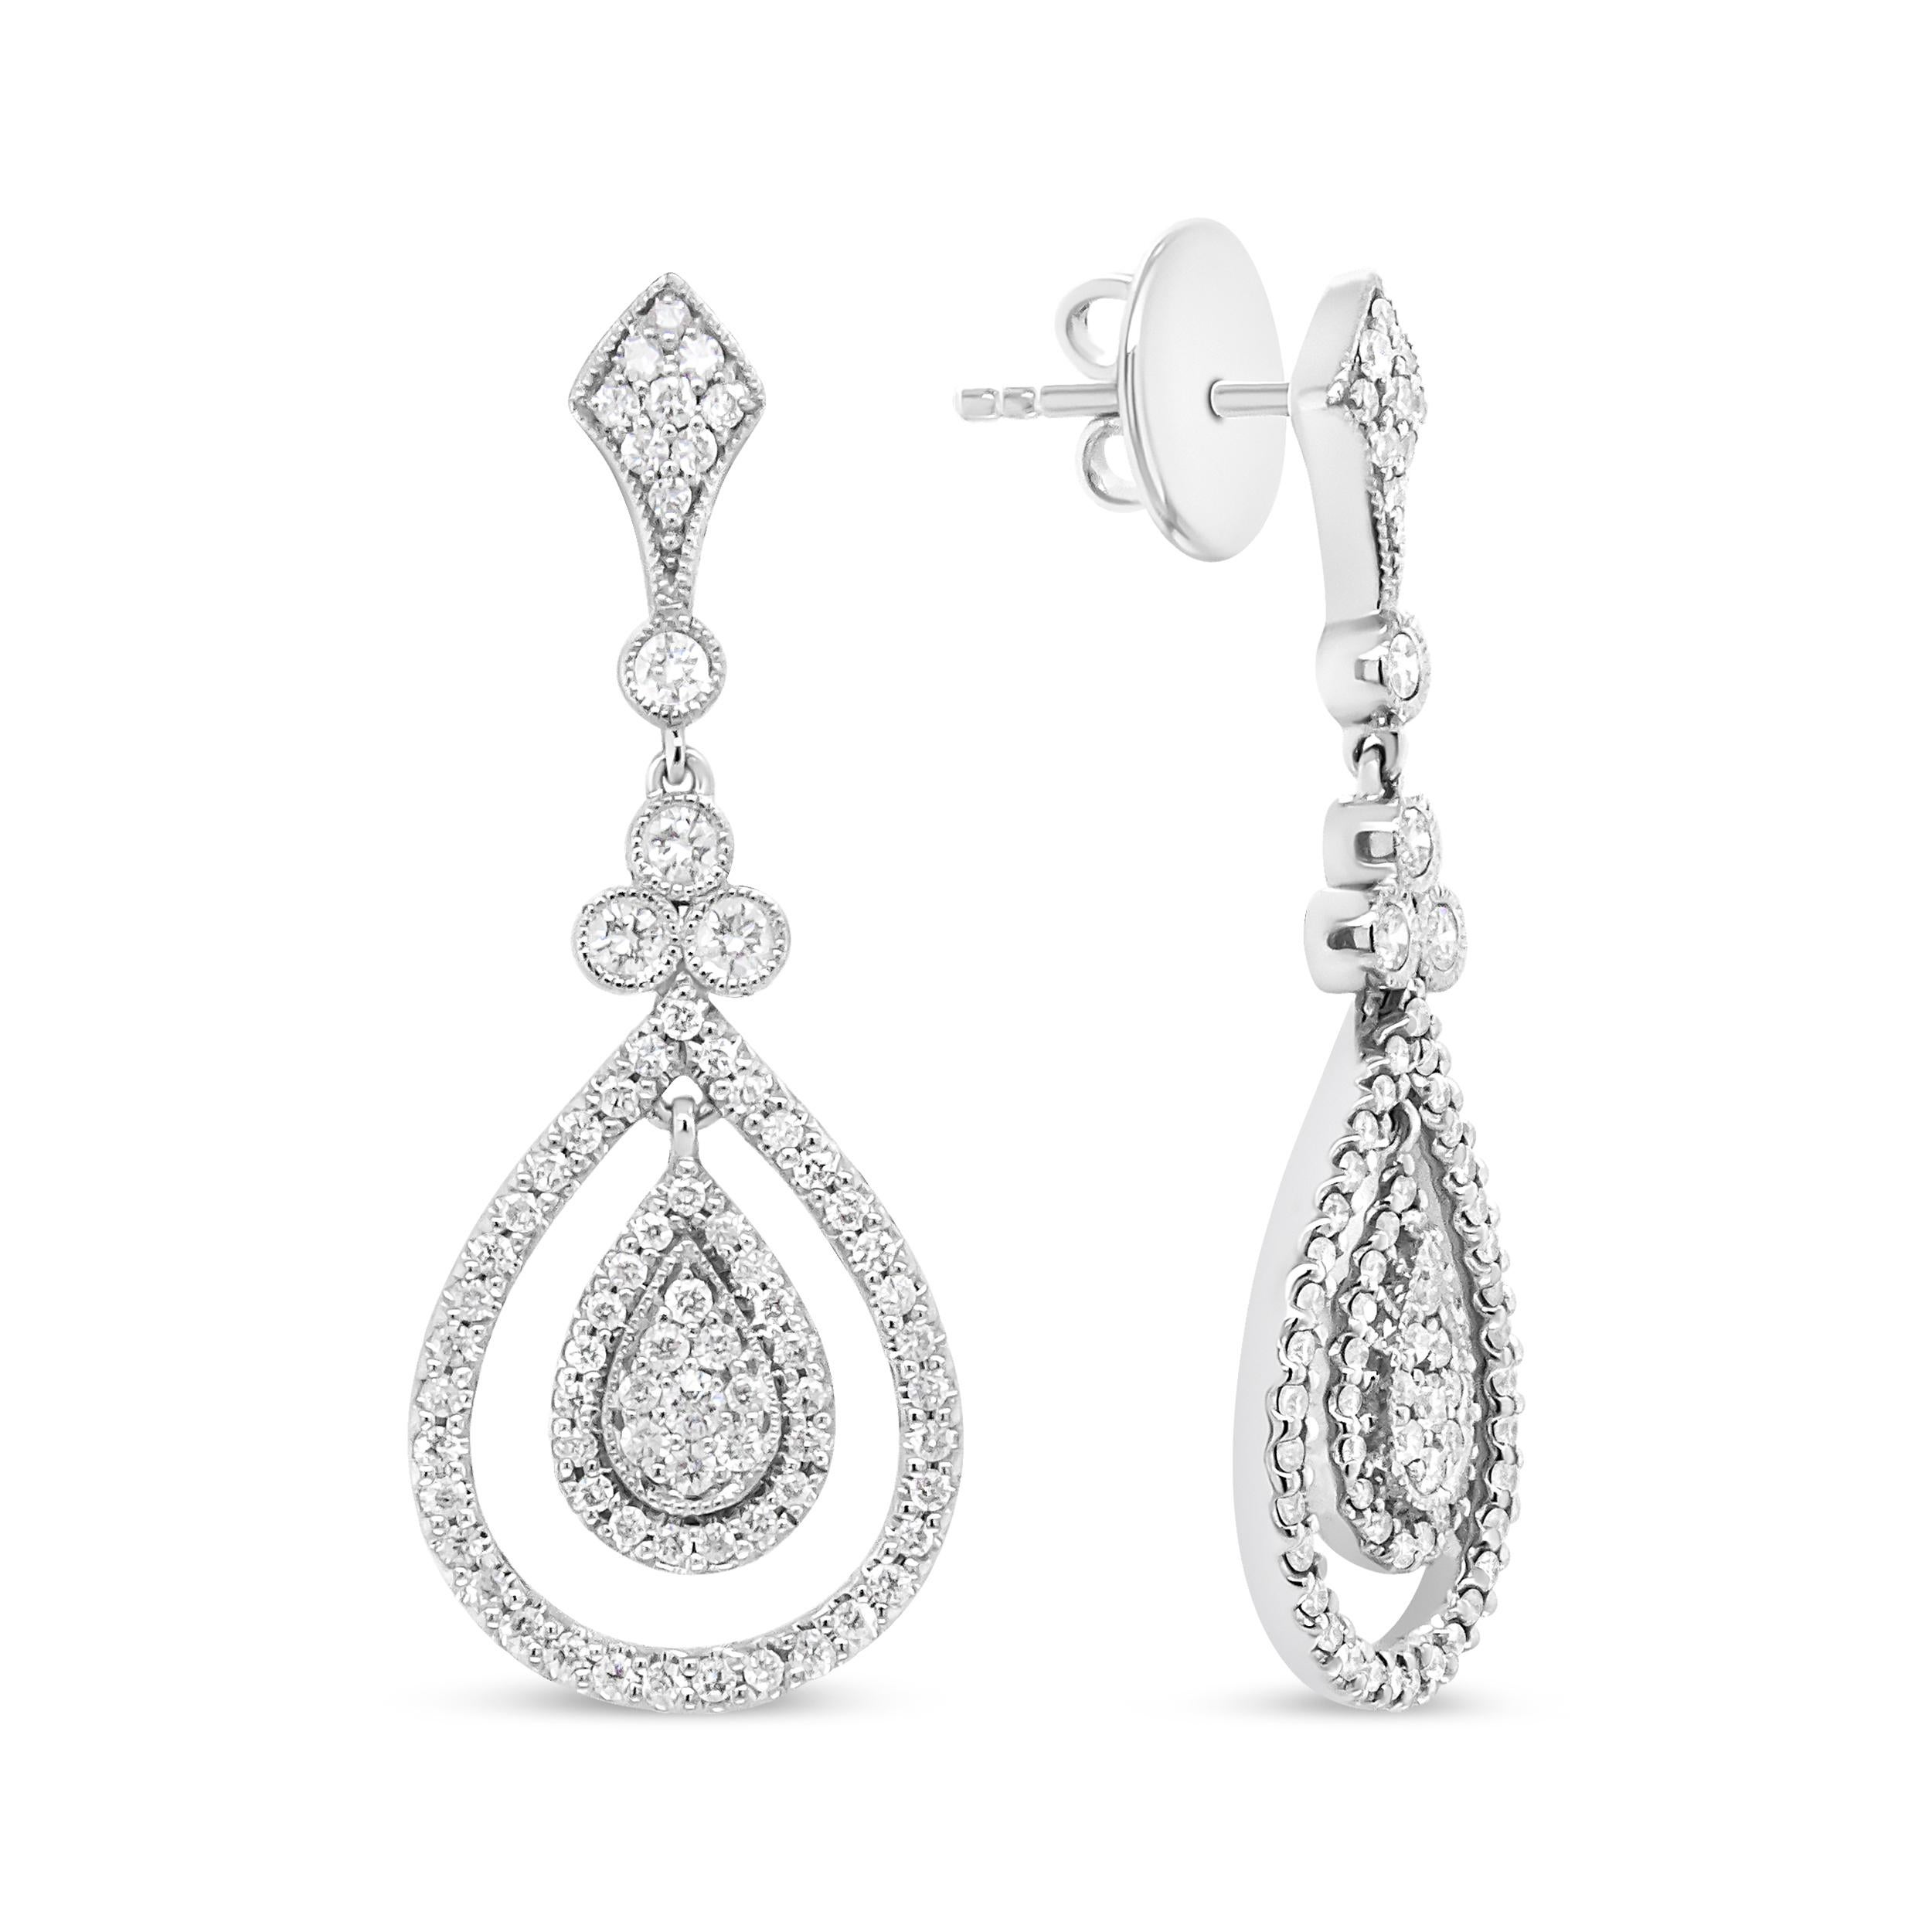 Contemporary 18K White Gold 1 1/4 Cttw Round Diamond Openwork Teardrop-Shaped Dangle Earrings For Sale